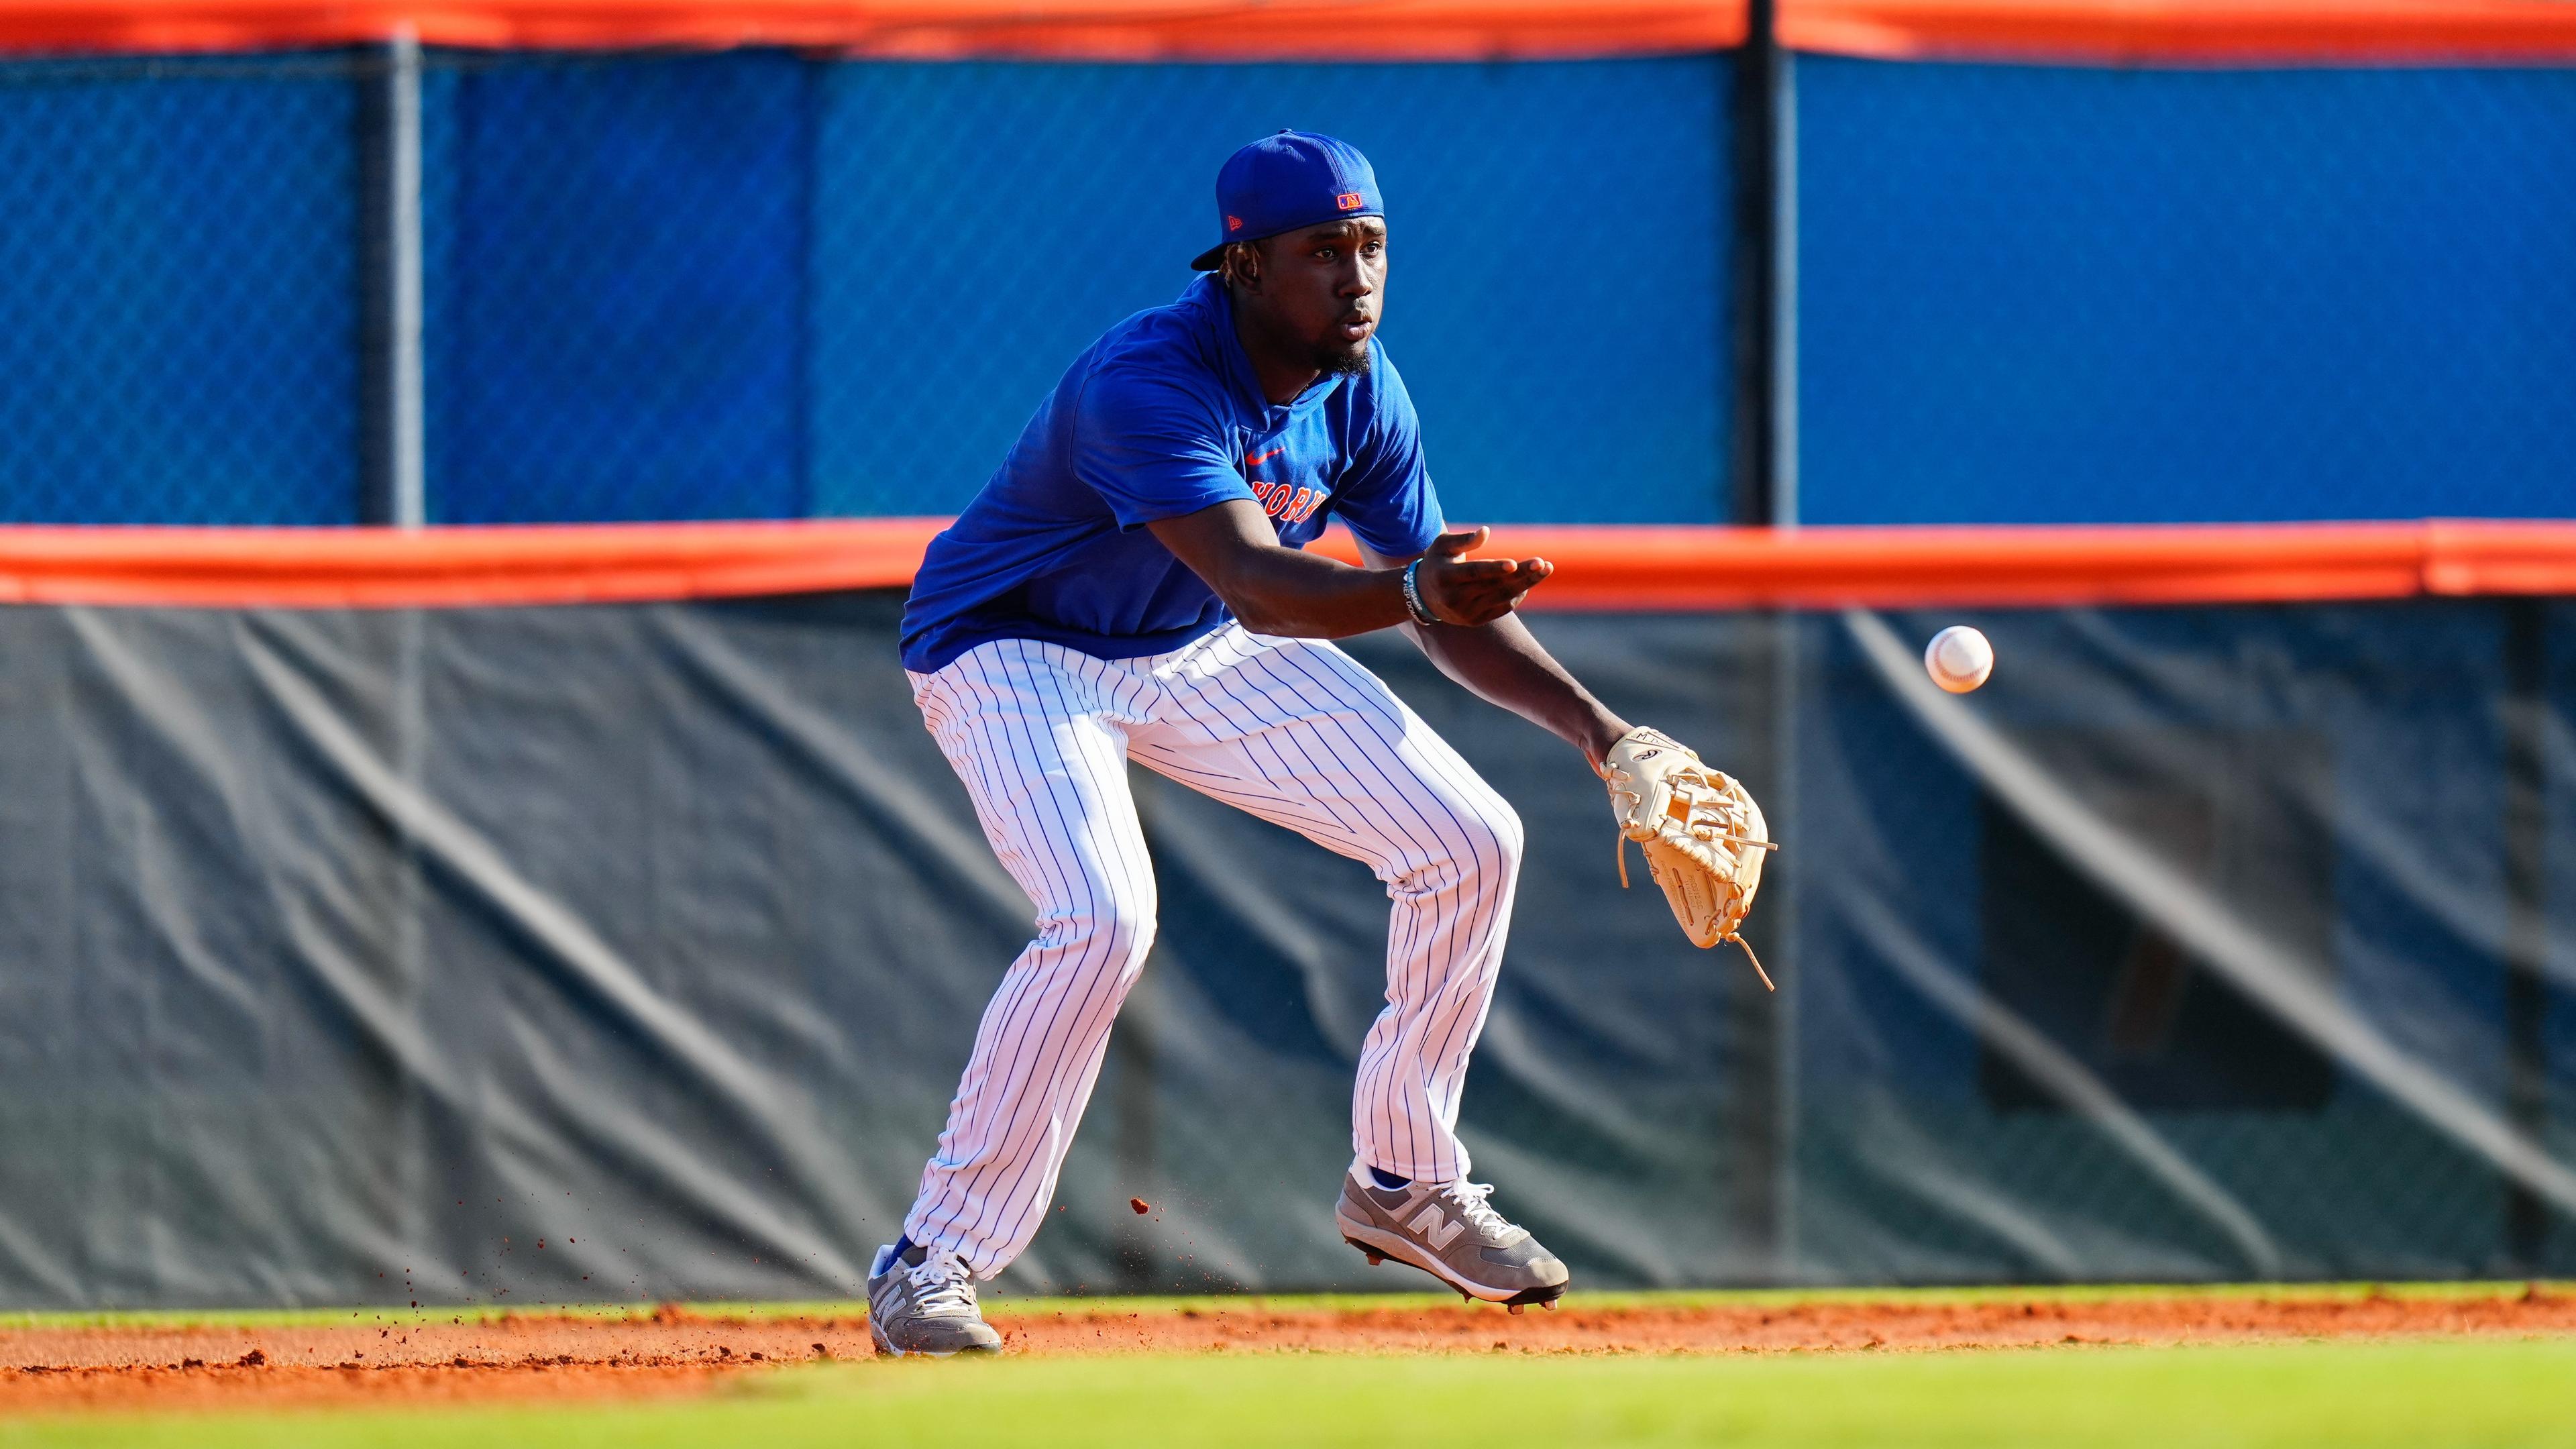 Feb 17, 2023; Port St. Lucie, FL, USA; New York Mets shortstop Ronny Mauricio (60) during spring training workouts. Mandatory Credit: Rich Storry-USA TODAY Sports / © Rich Storry-USA TODAY Sports